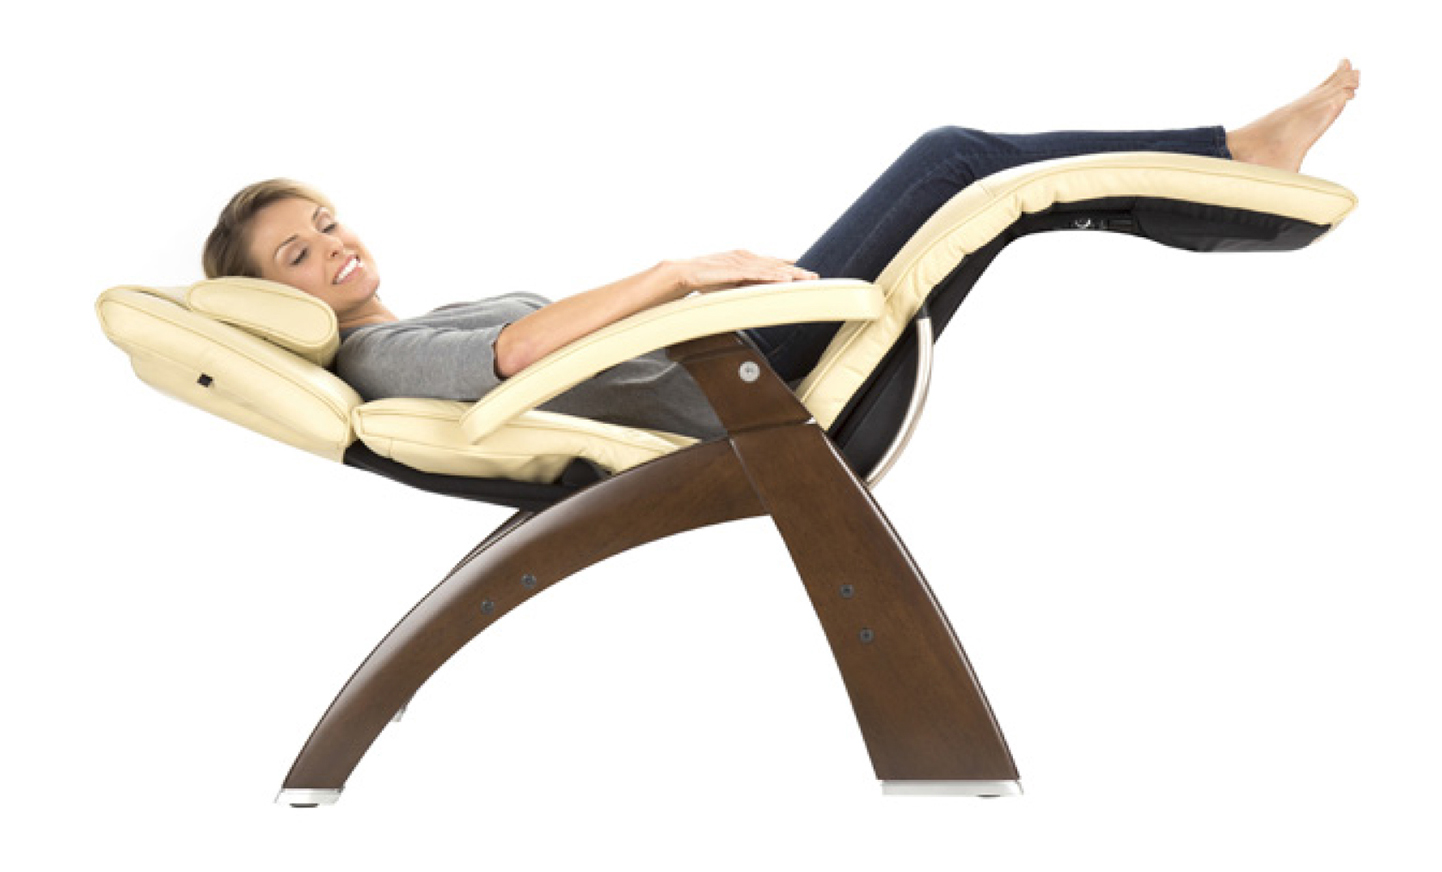 Human Touch PC-610 Omni-Motion Perfect Chair Series 2 Power Recline Walnut Wood Base Zero-Gravity Recliner - Ivory Premium Leather - image 1 of 1